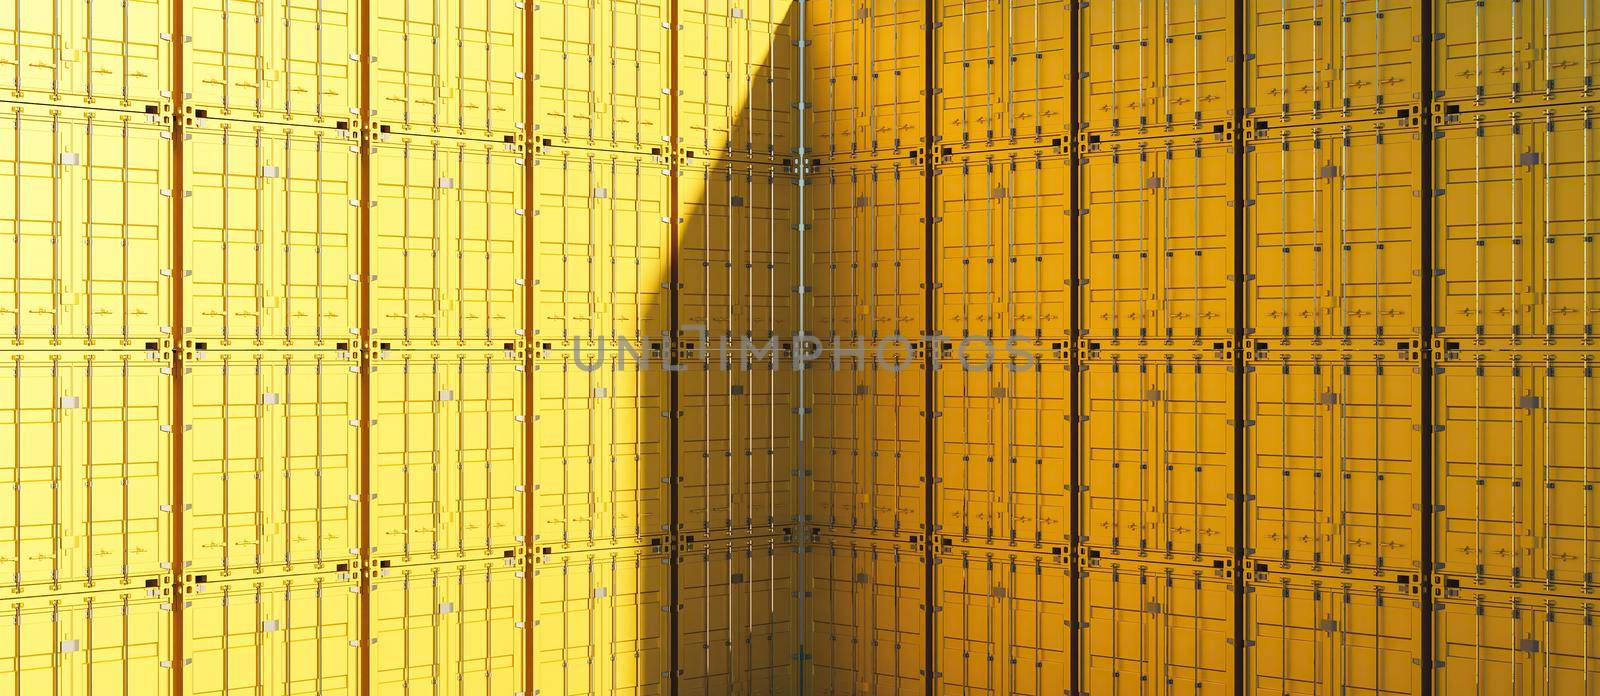 yellow truck container pattern by asolano